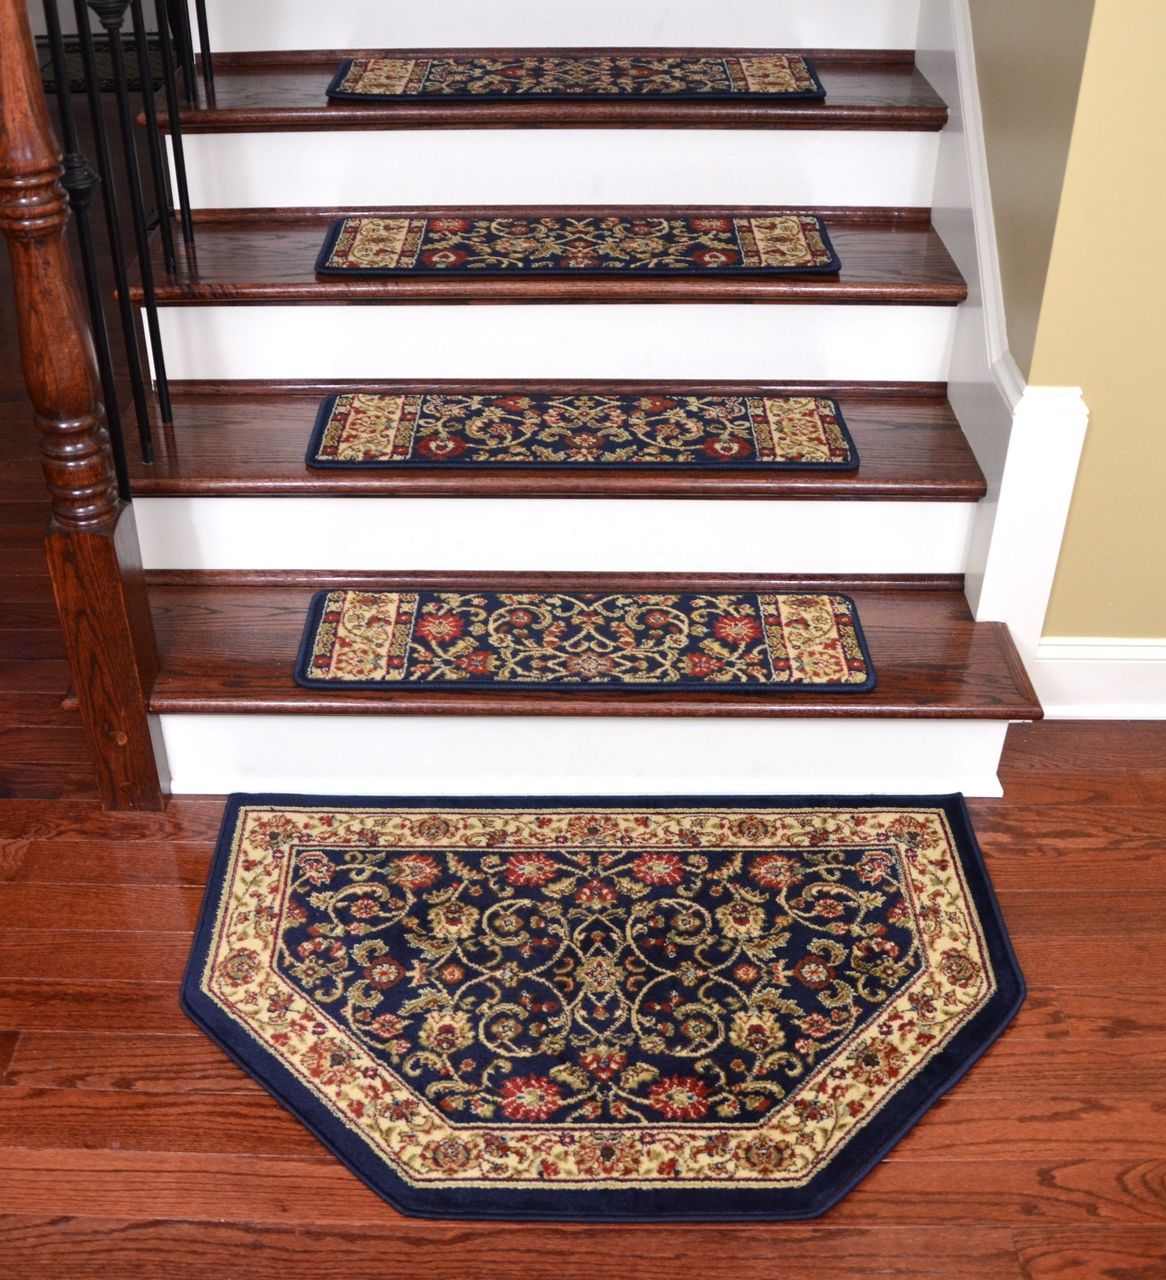 Rug Home Depot Stairs Carpet Stair Treads Lowes Indoor With Regard To Indoor Outdoor Carpet Stair Treads (View 9 of 20)